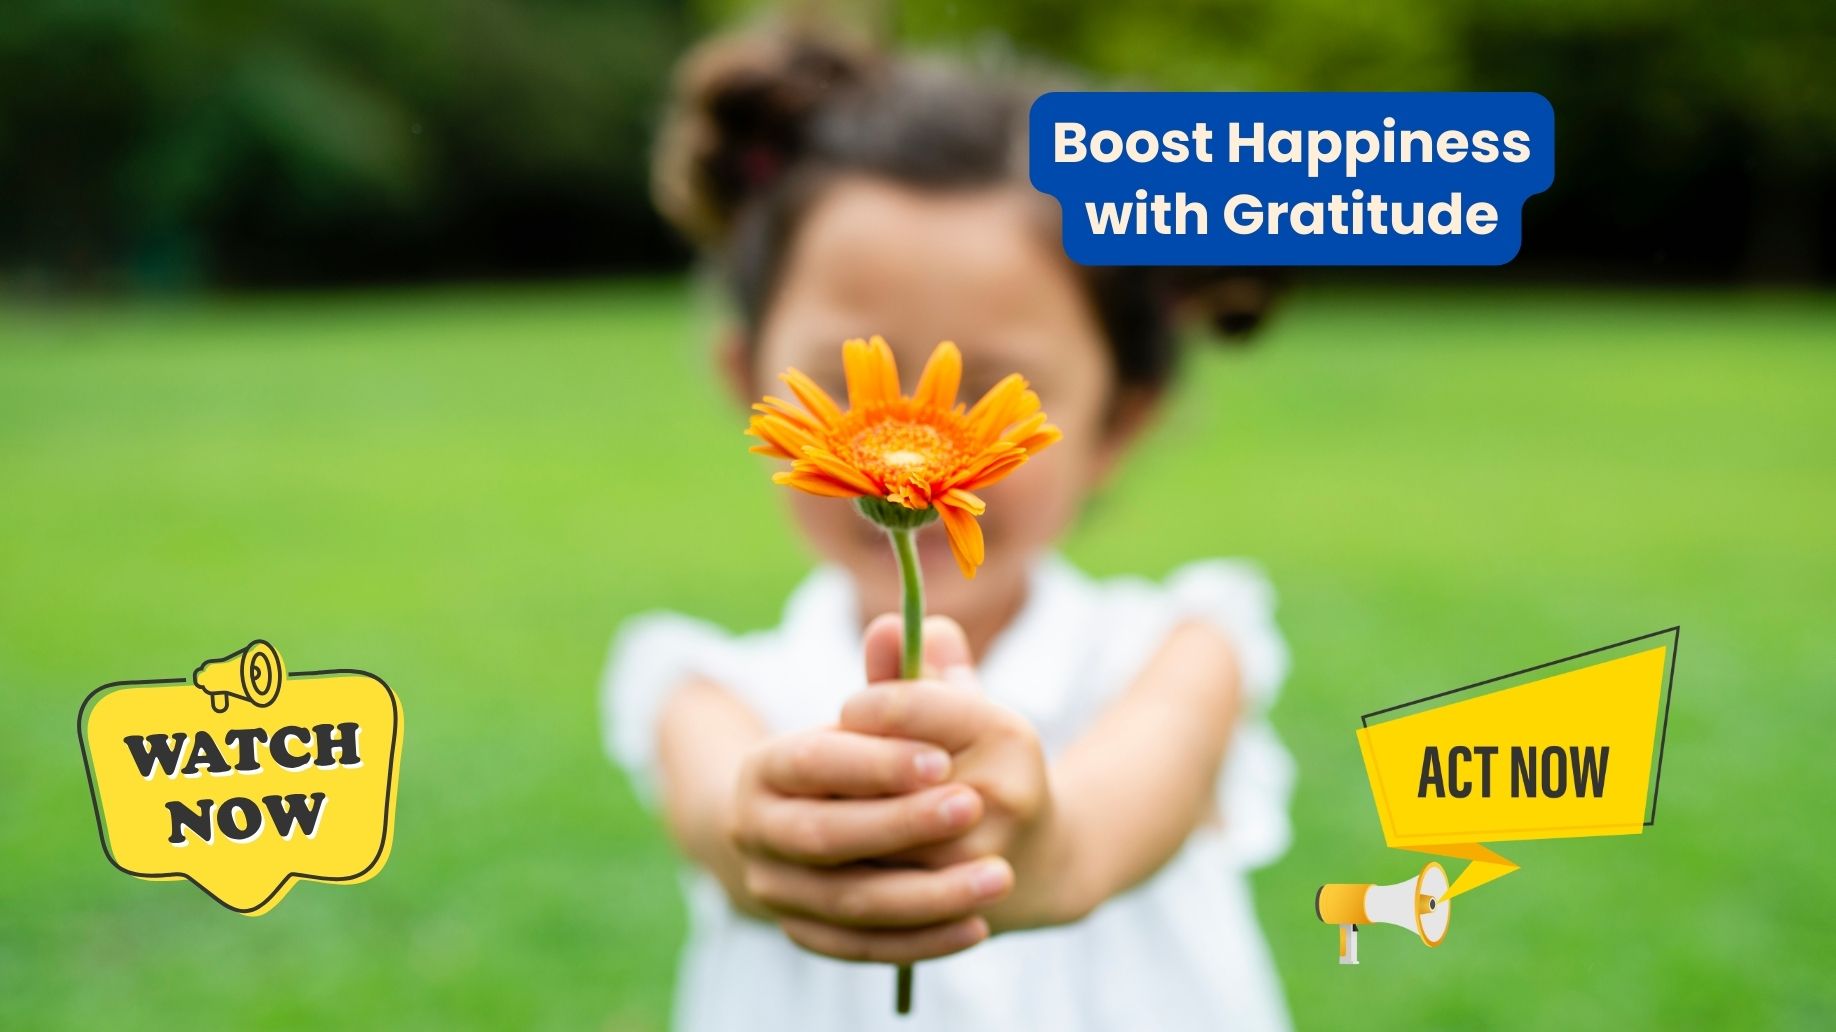 Boost Happiness with gratitude